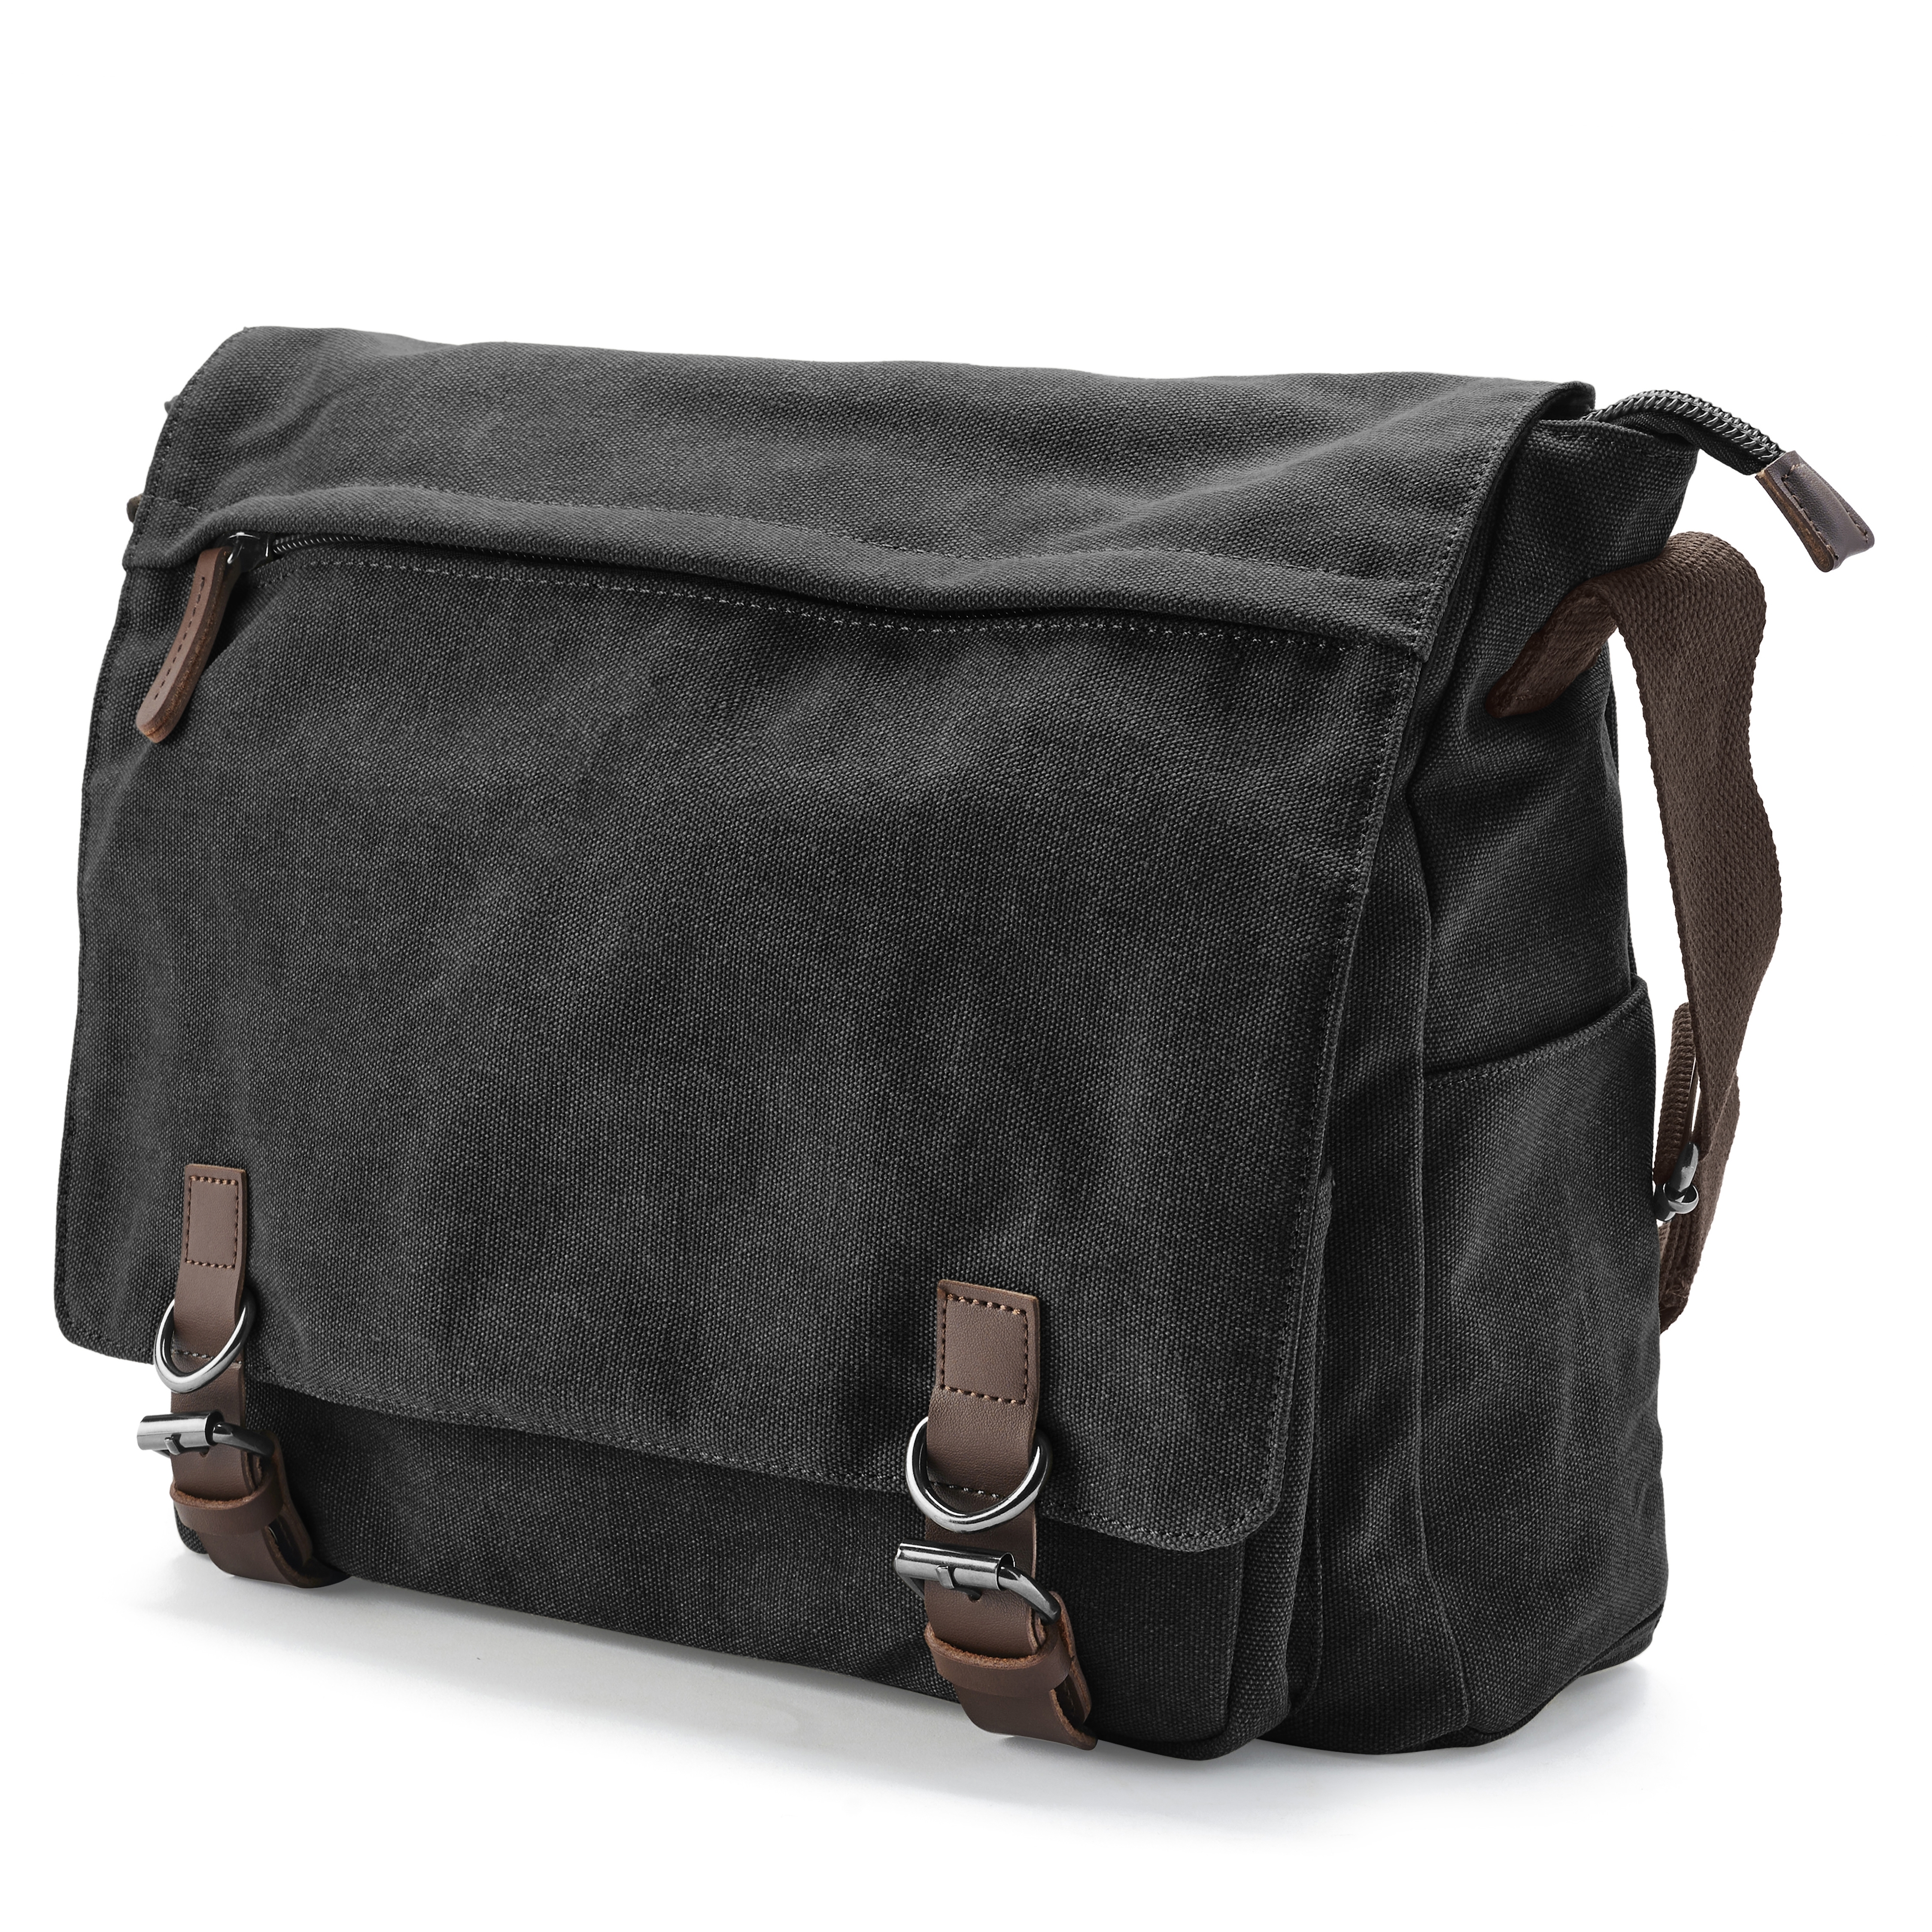 Crosstown Messenger Bag, Waxed Canvas & Leather, Hard Times - Oberon Design